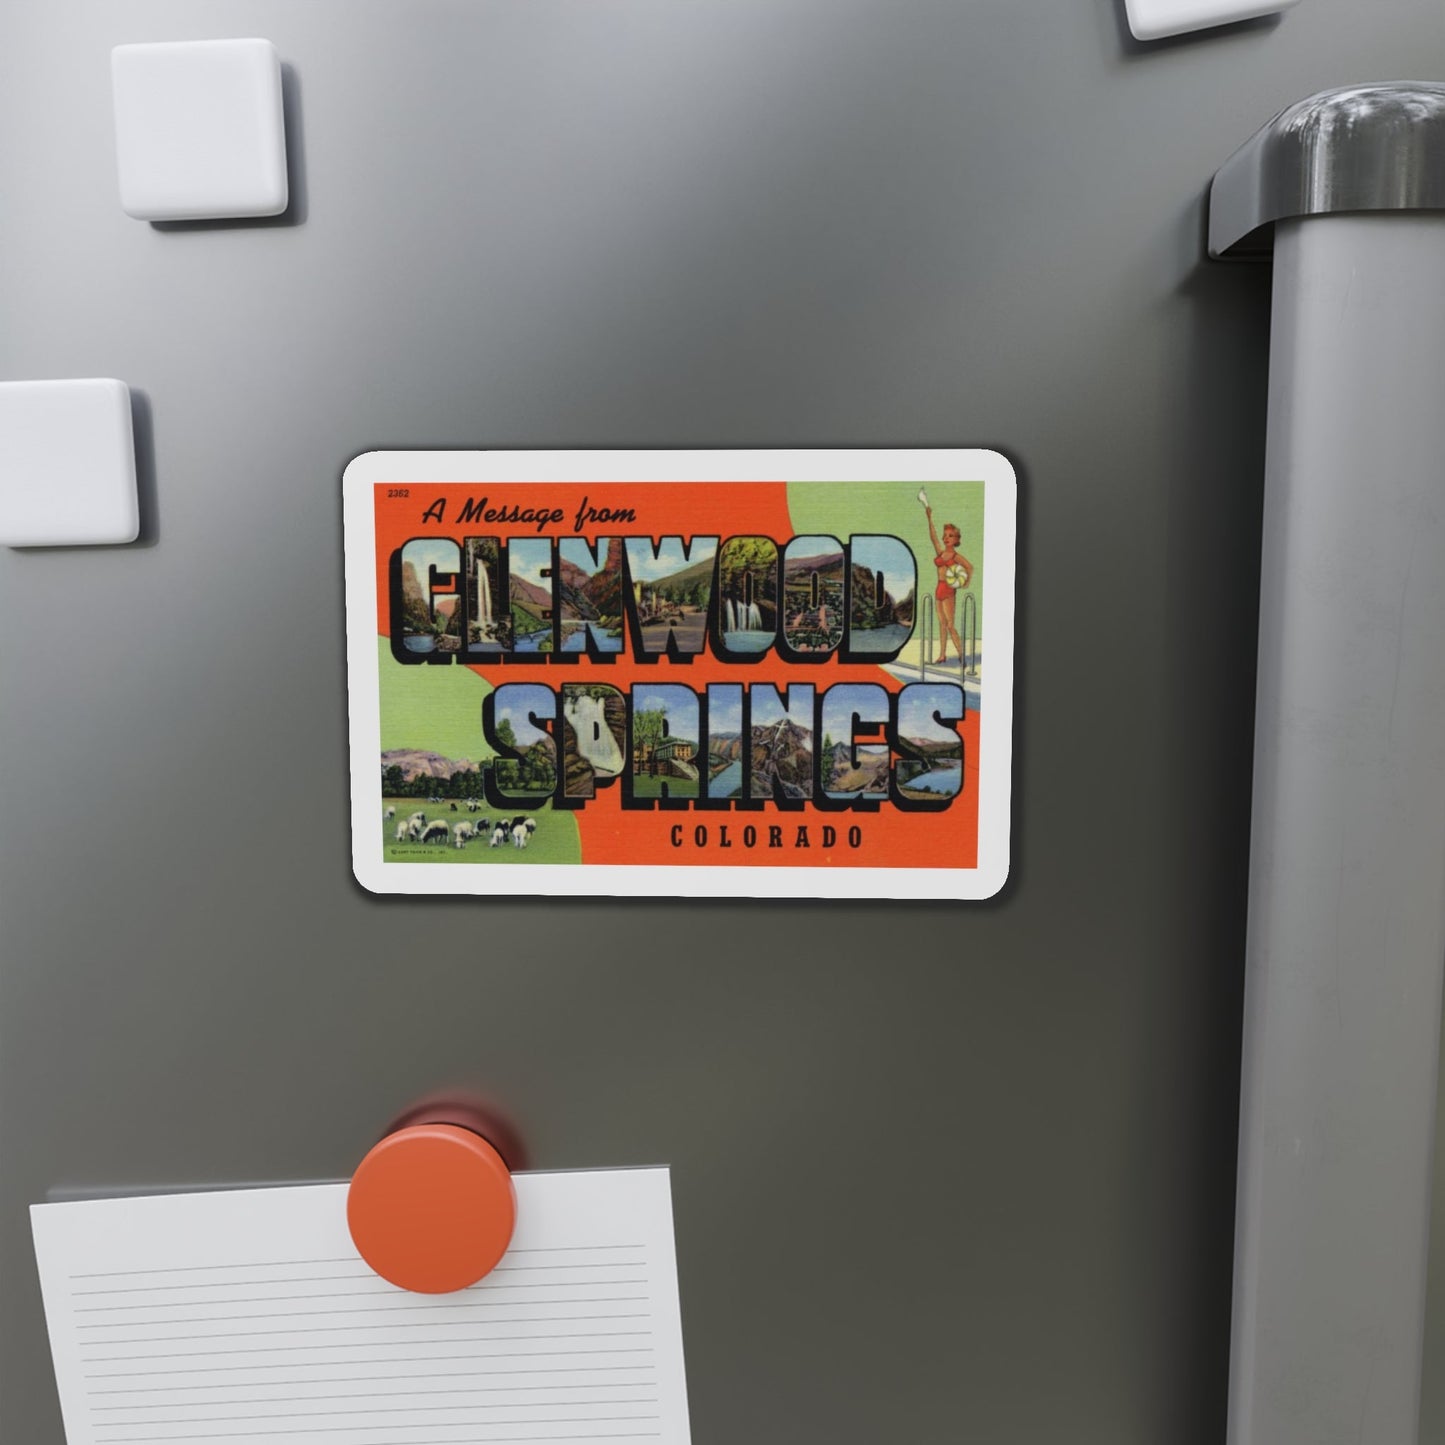 A Message From Glenwood Springs Colorado (Greeting Postcards) Die-Cut Magnet-The Sticker Space